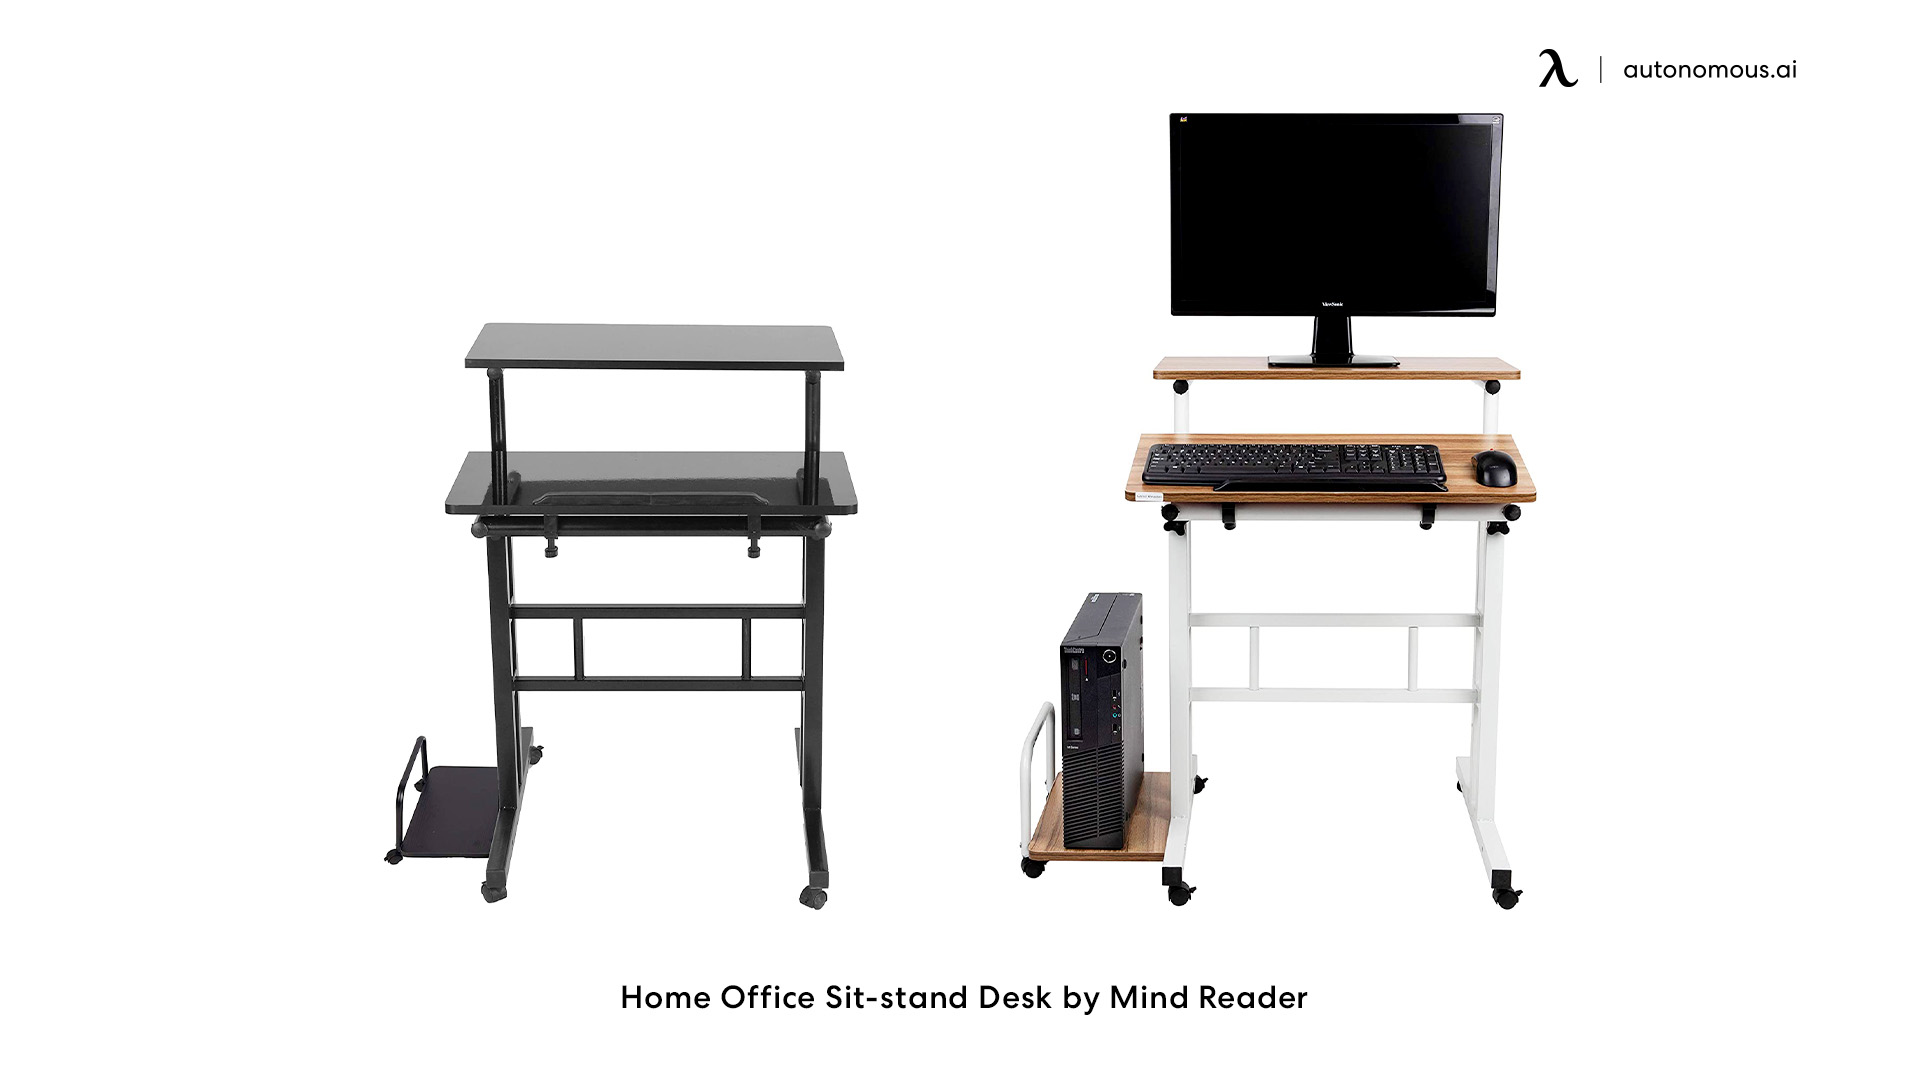 Home Office Sit-stand Desk by Mind Reader